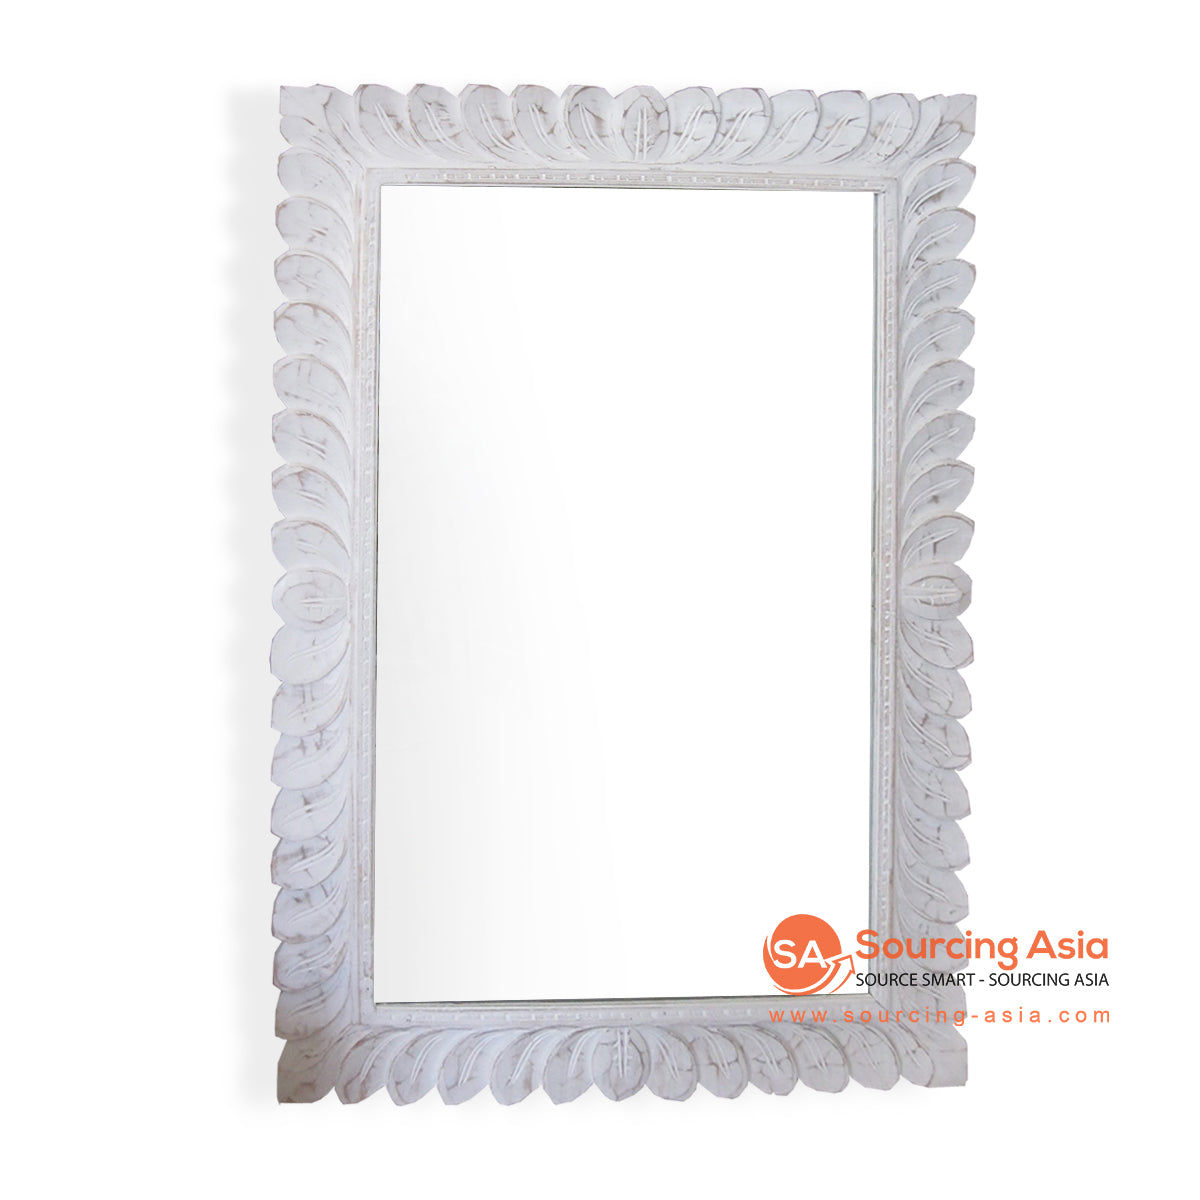 SSU019-70WW WHITE WASH WOODEN MIRROR WITH CARVING